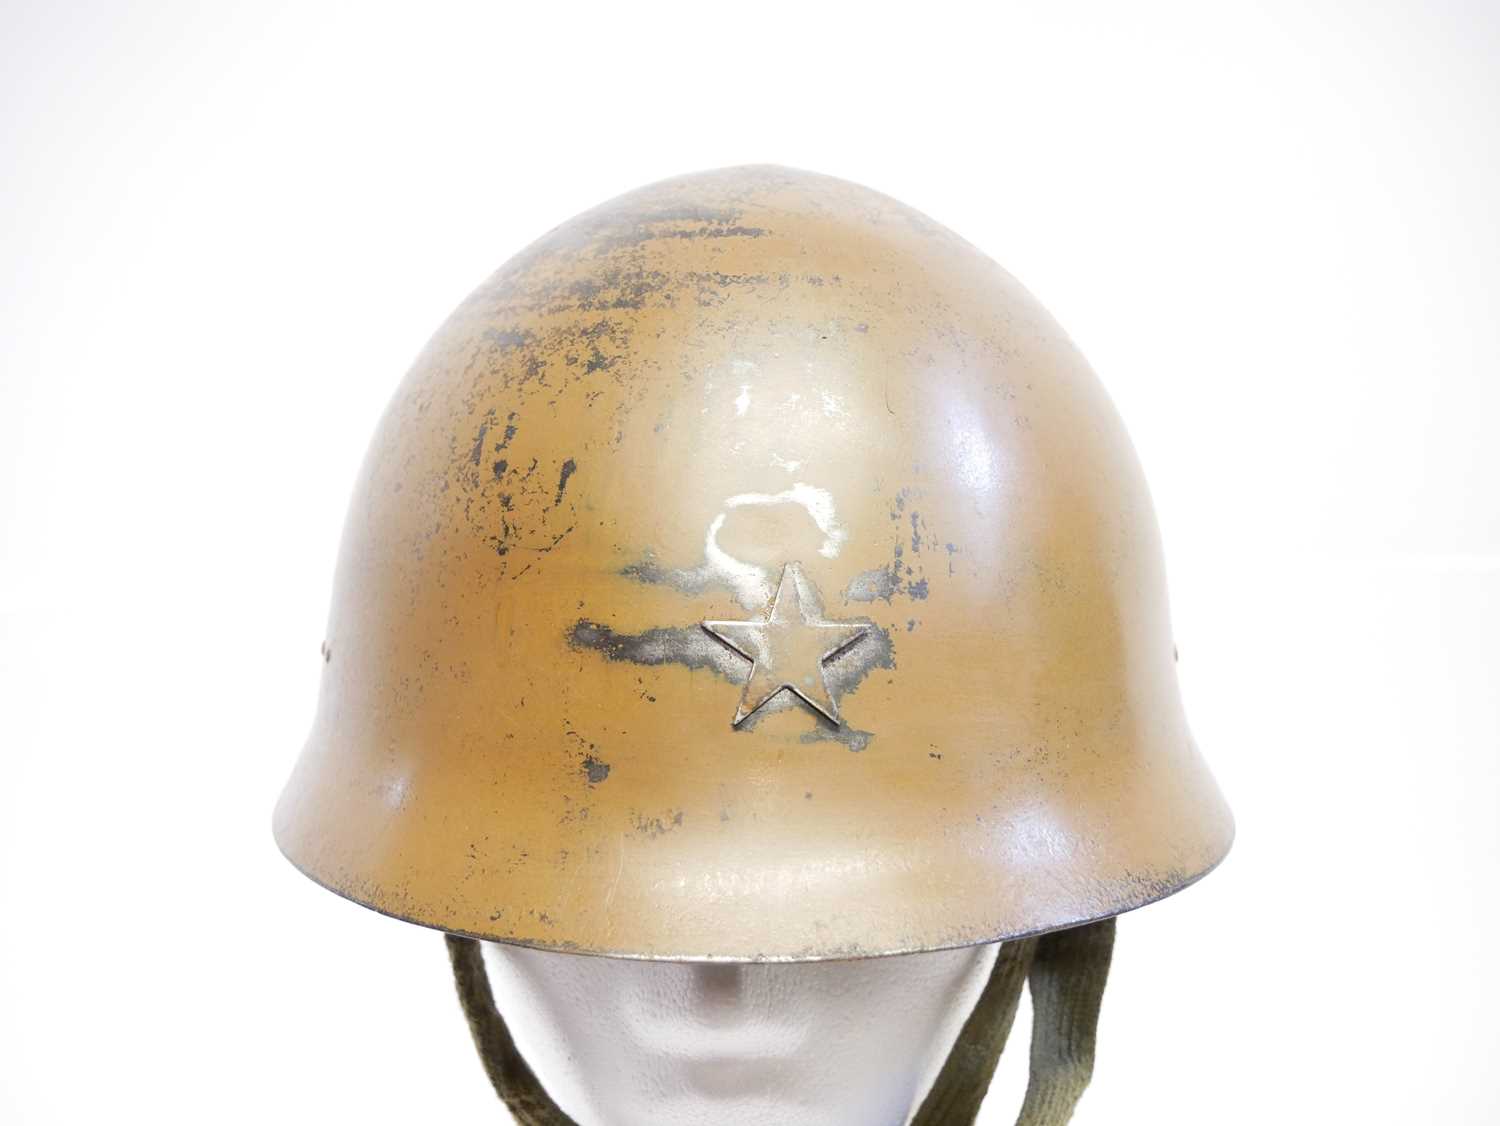 Japanese Type 90 Helmet, stamped 1543, with leather liner, repainted and aged, the helmet original - Image 2 of 7